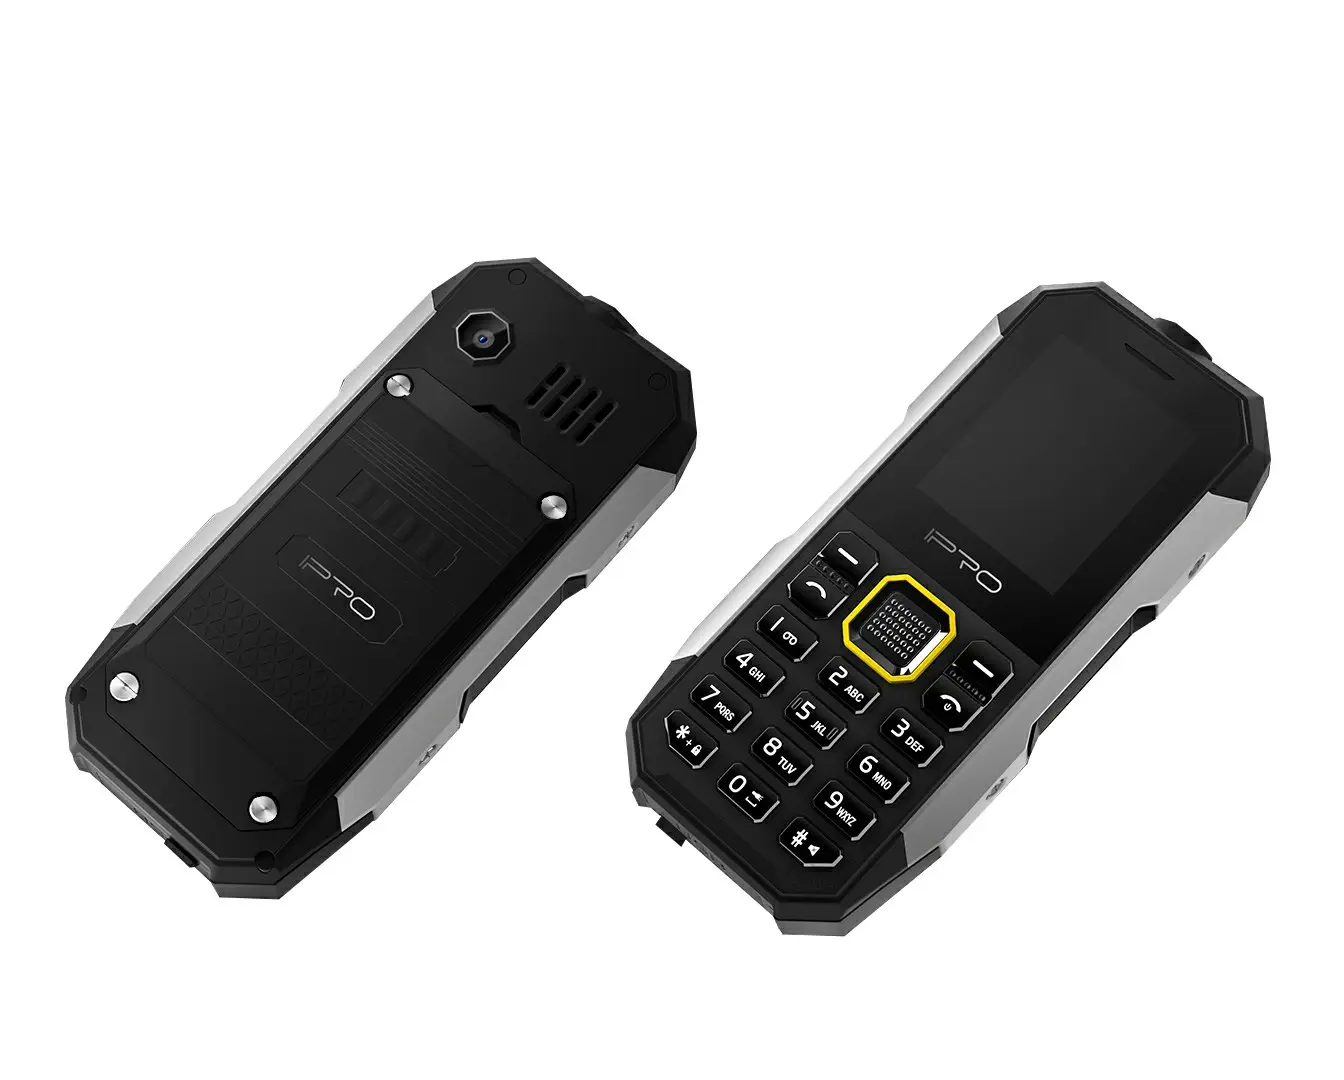 OEM factory 2500mAh Battery 2.0'' Waterproof mobile Drop proof cellular Large button cell phone Rugged Phone for Nokia